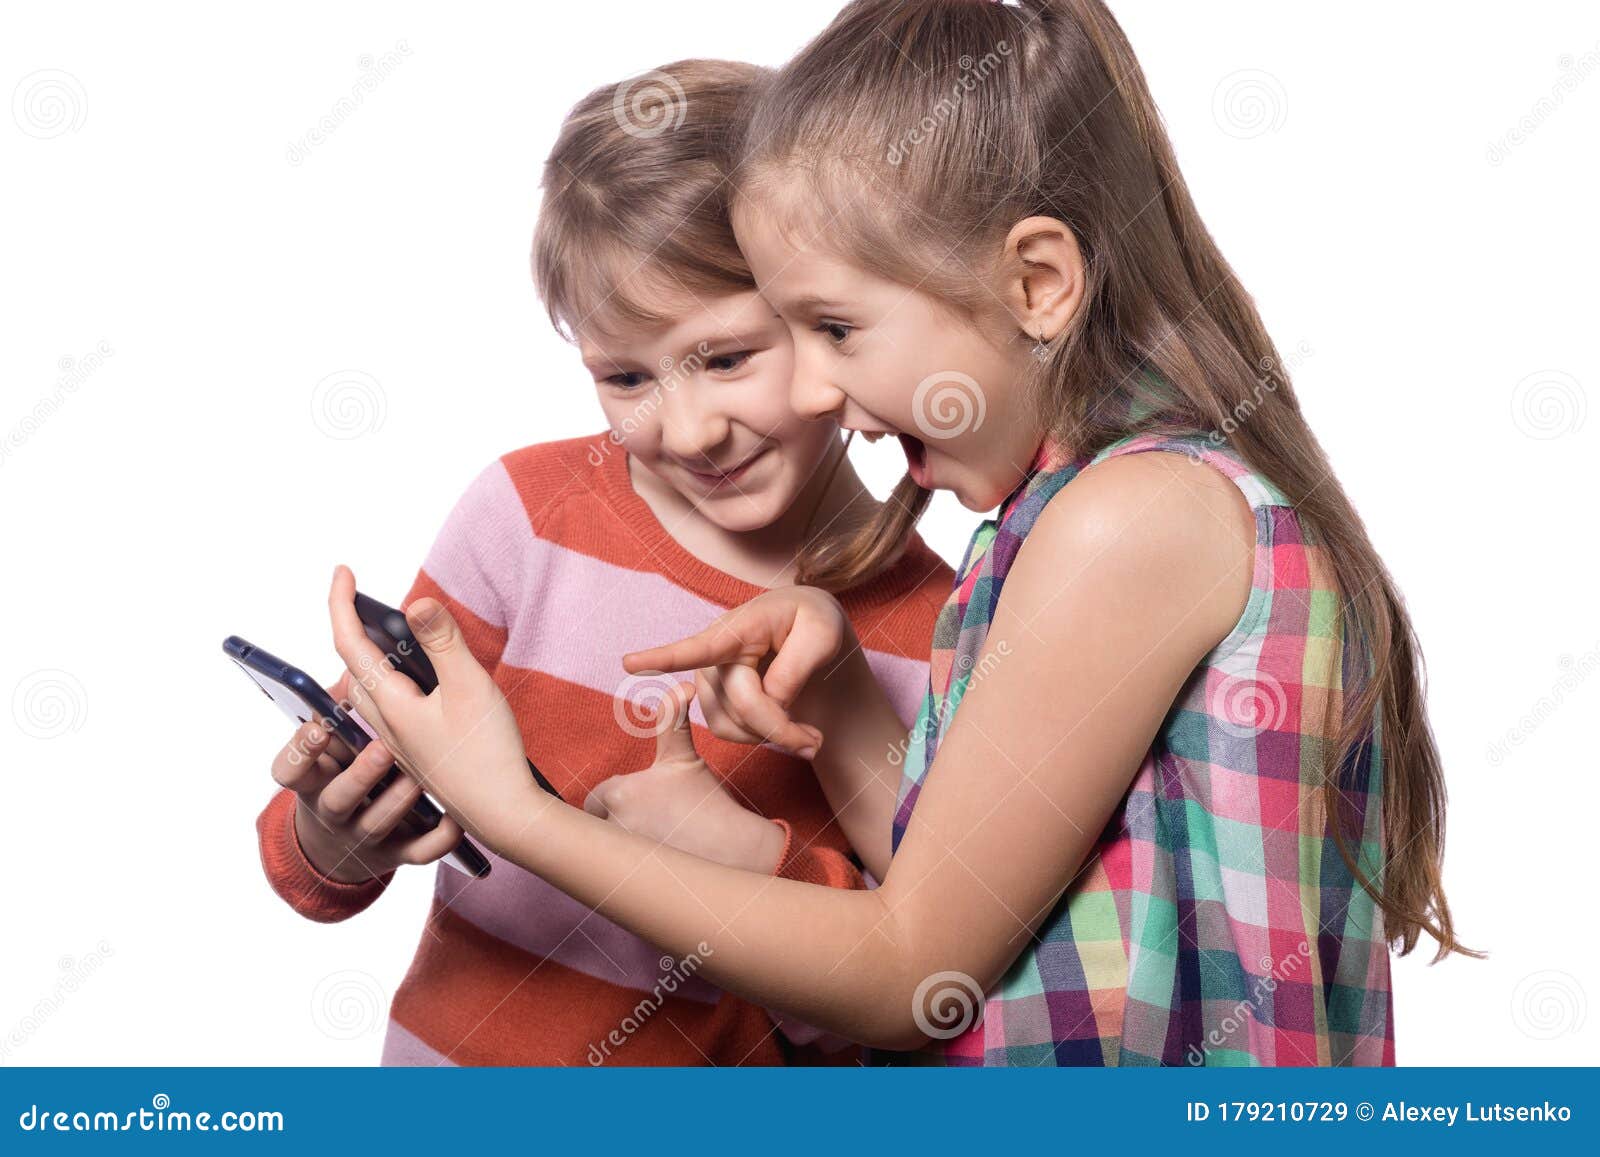 Two Cute Little Girls Posing With Mobile Phones Stock Image - Image of ...